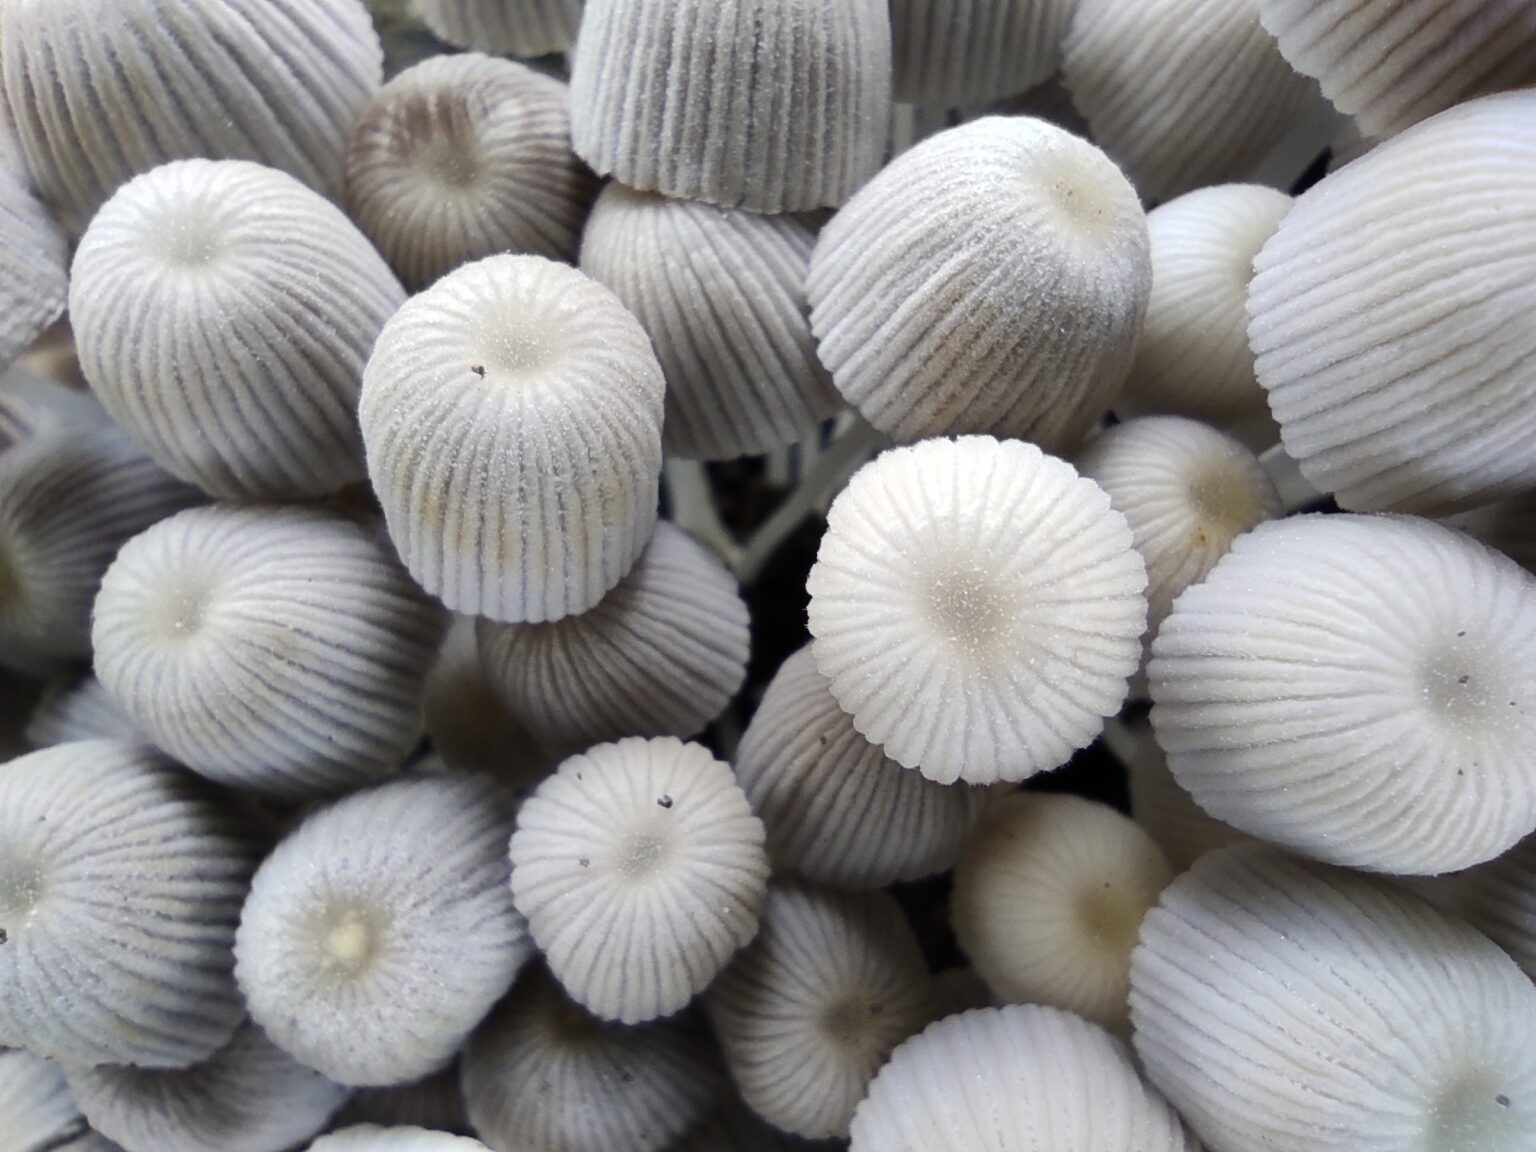 White capped mushrooms growing